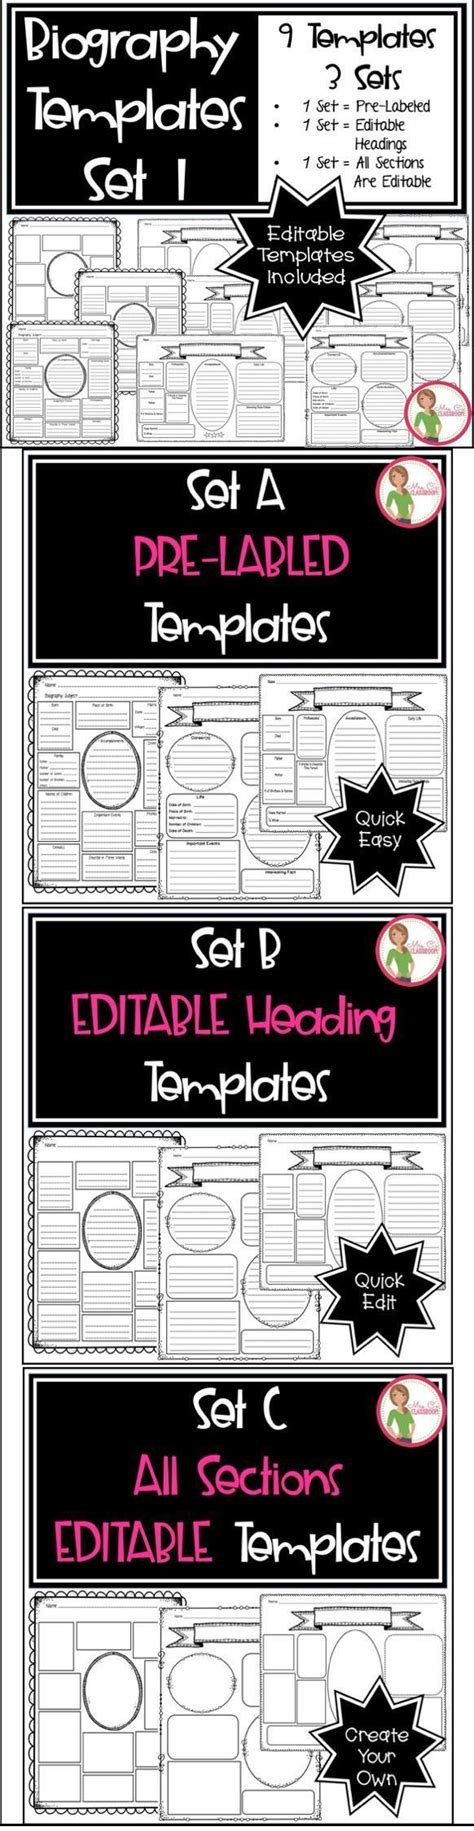 This Set Of Graphic Organizers Includes 9 Biography Templates There